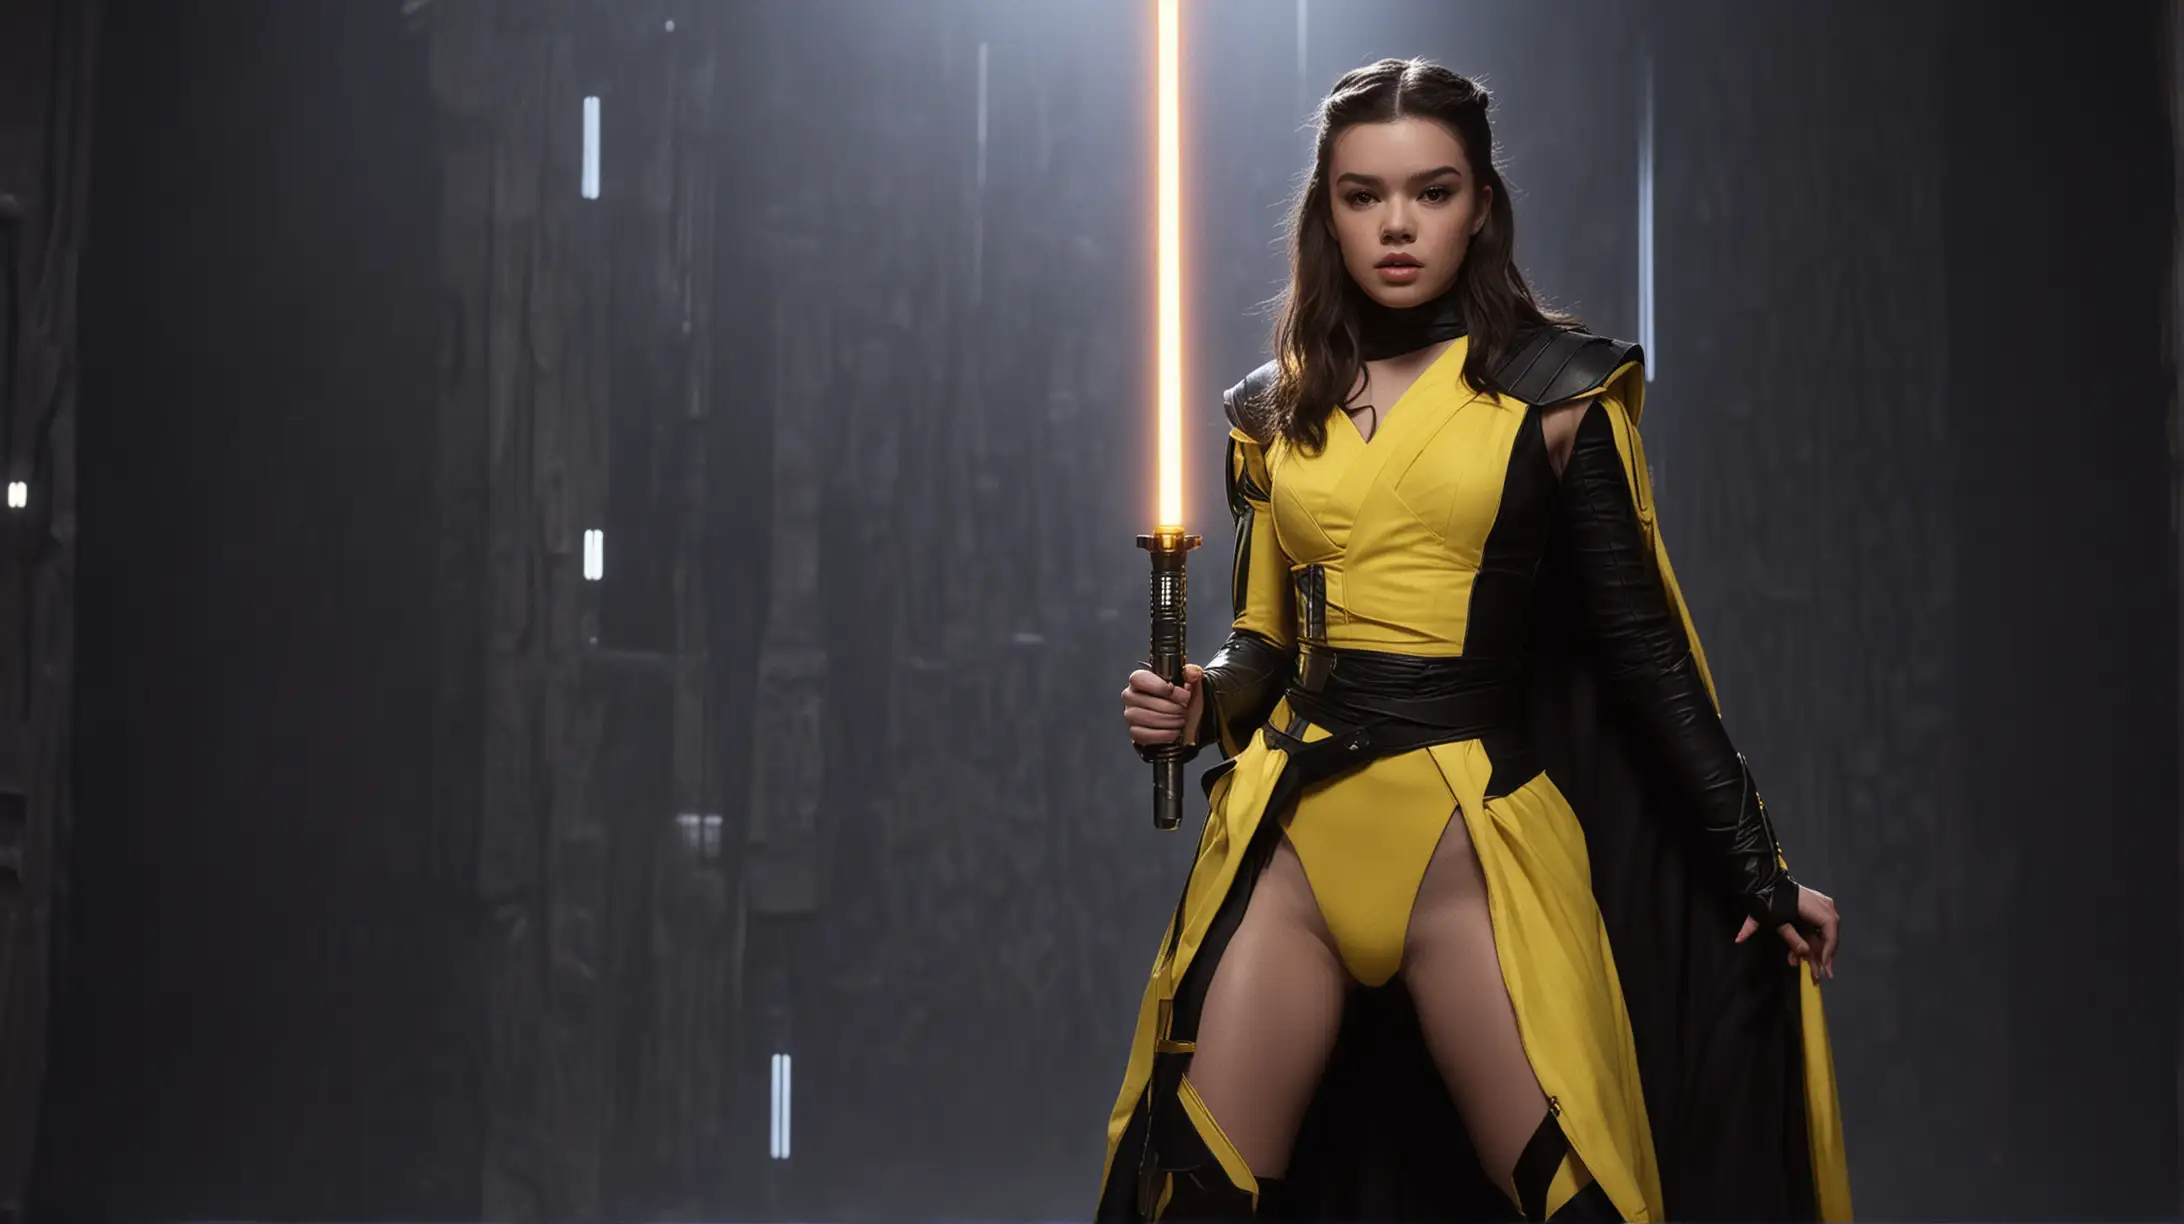 Hailee Steinfeld Sith Queen Sultry Solo Warrior with Lightsaber